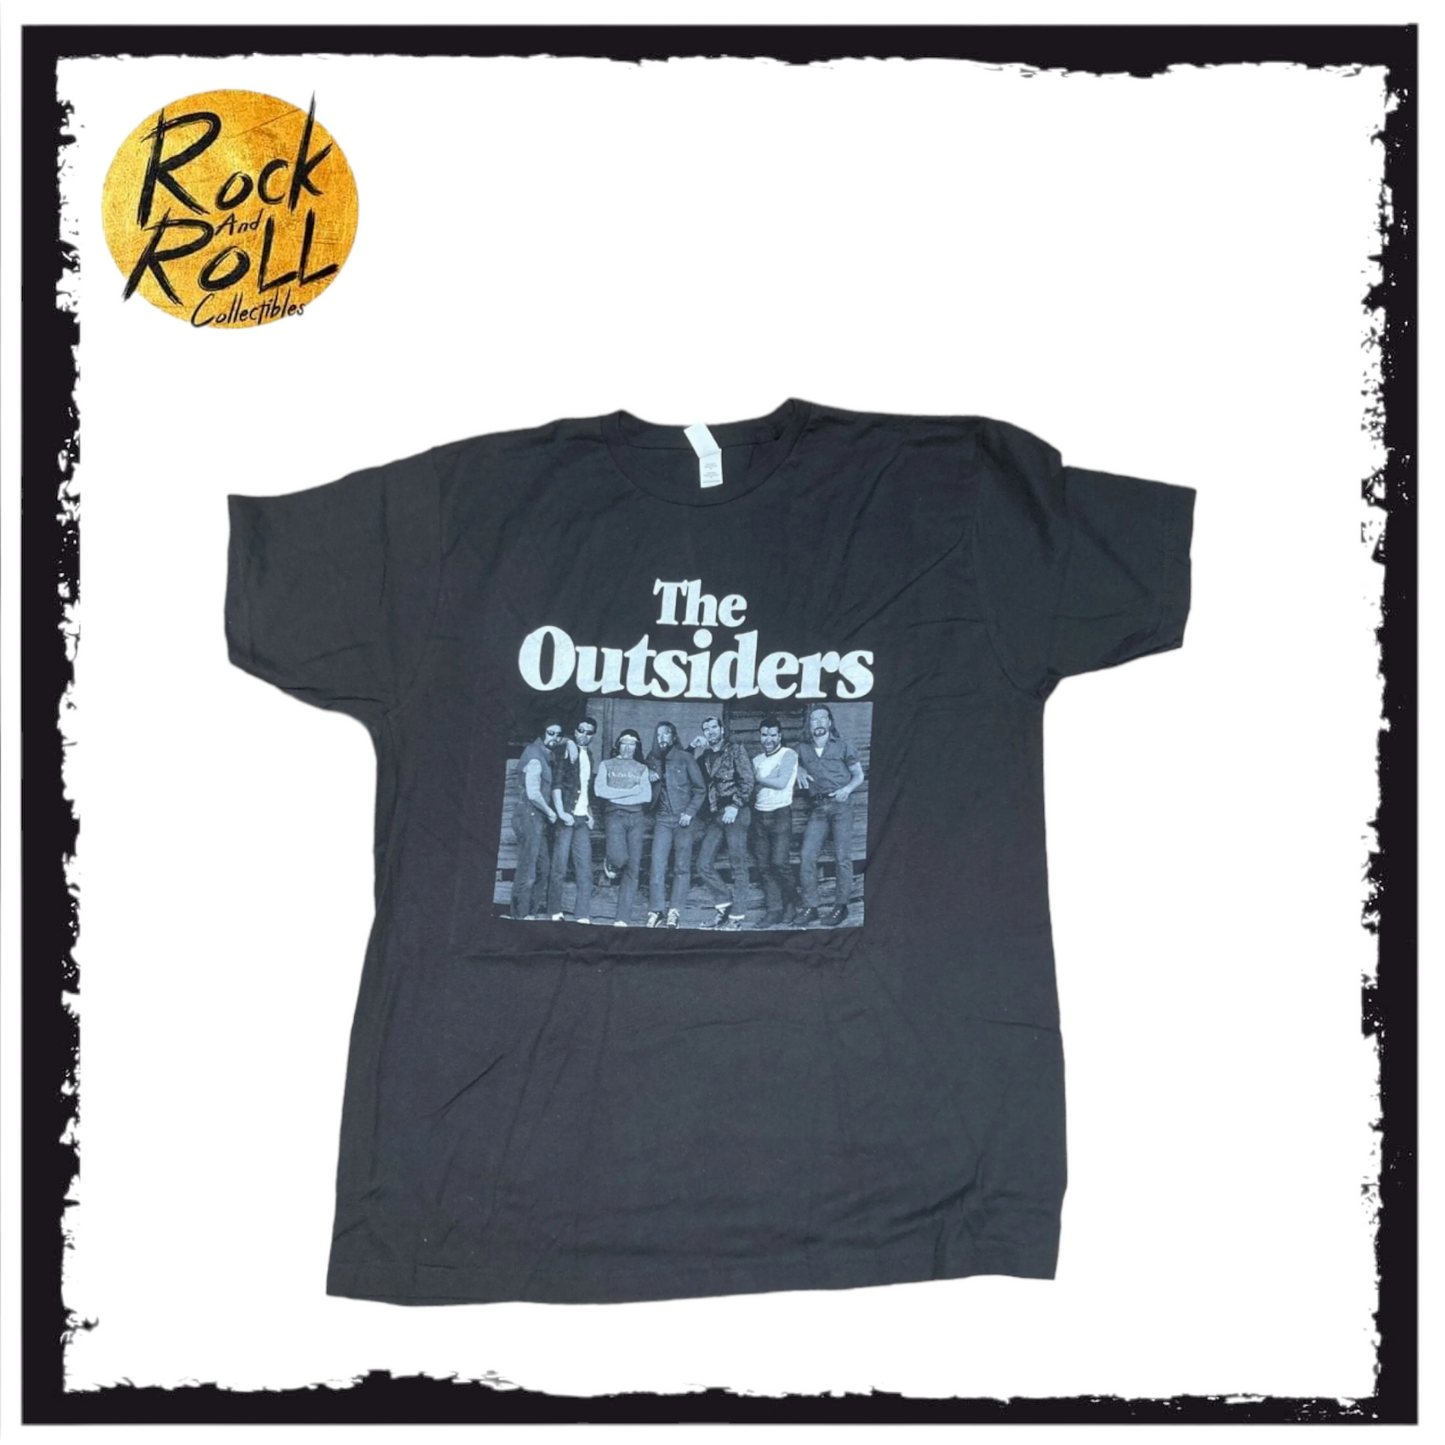 The Outsiders T-Shirt - Pro Wrestling Crate - Size US X-Large